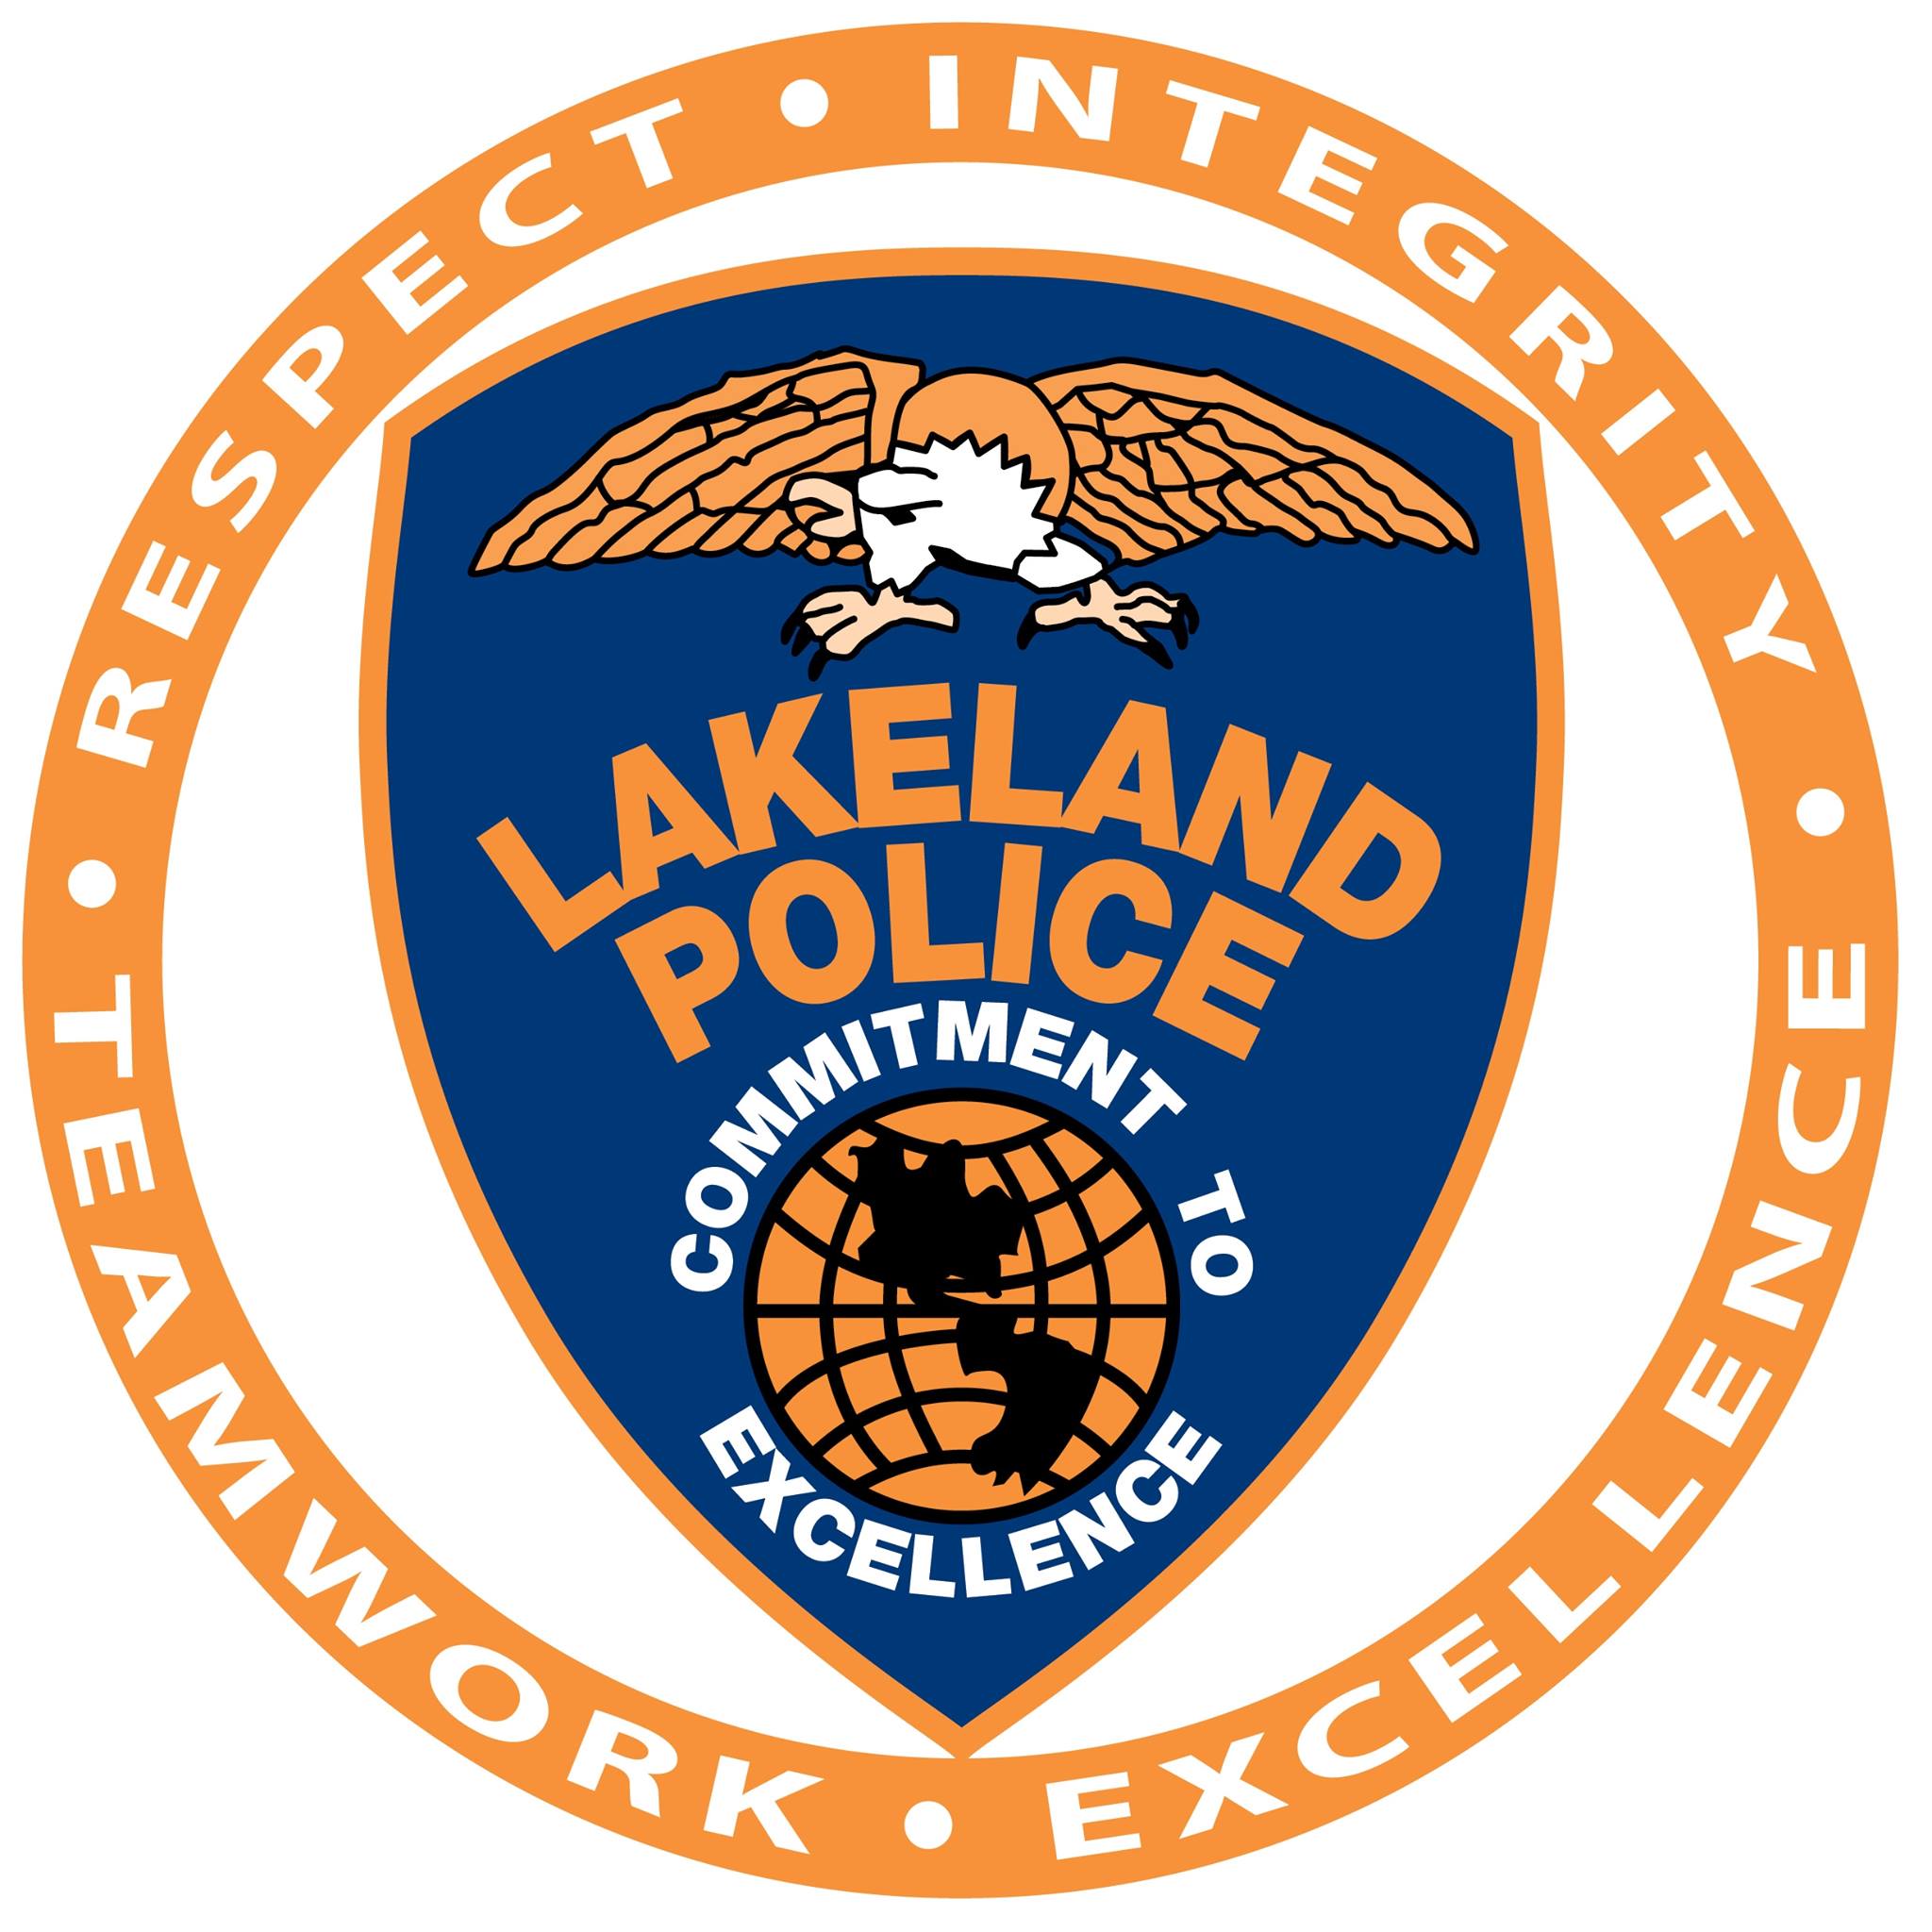 A picture of the Lakeland Police Department logo